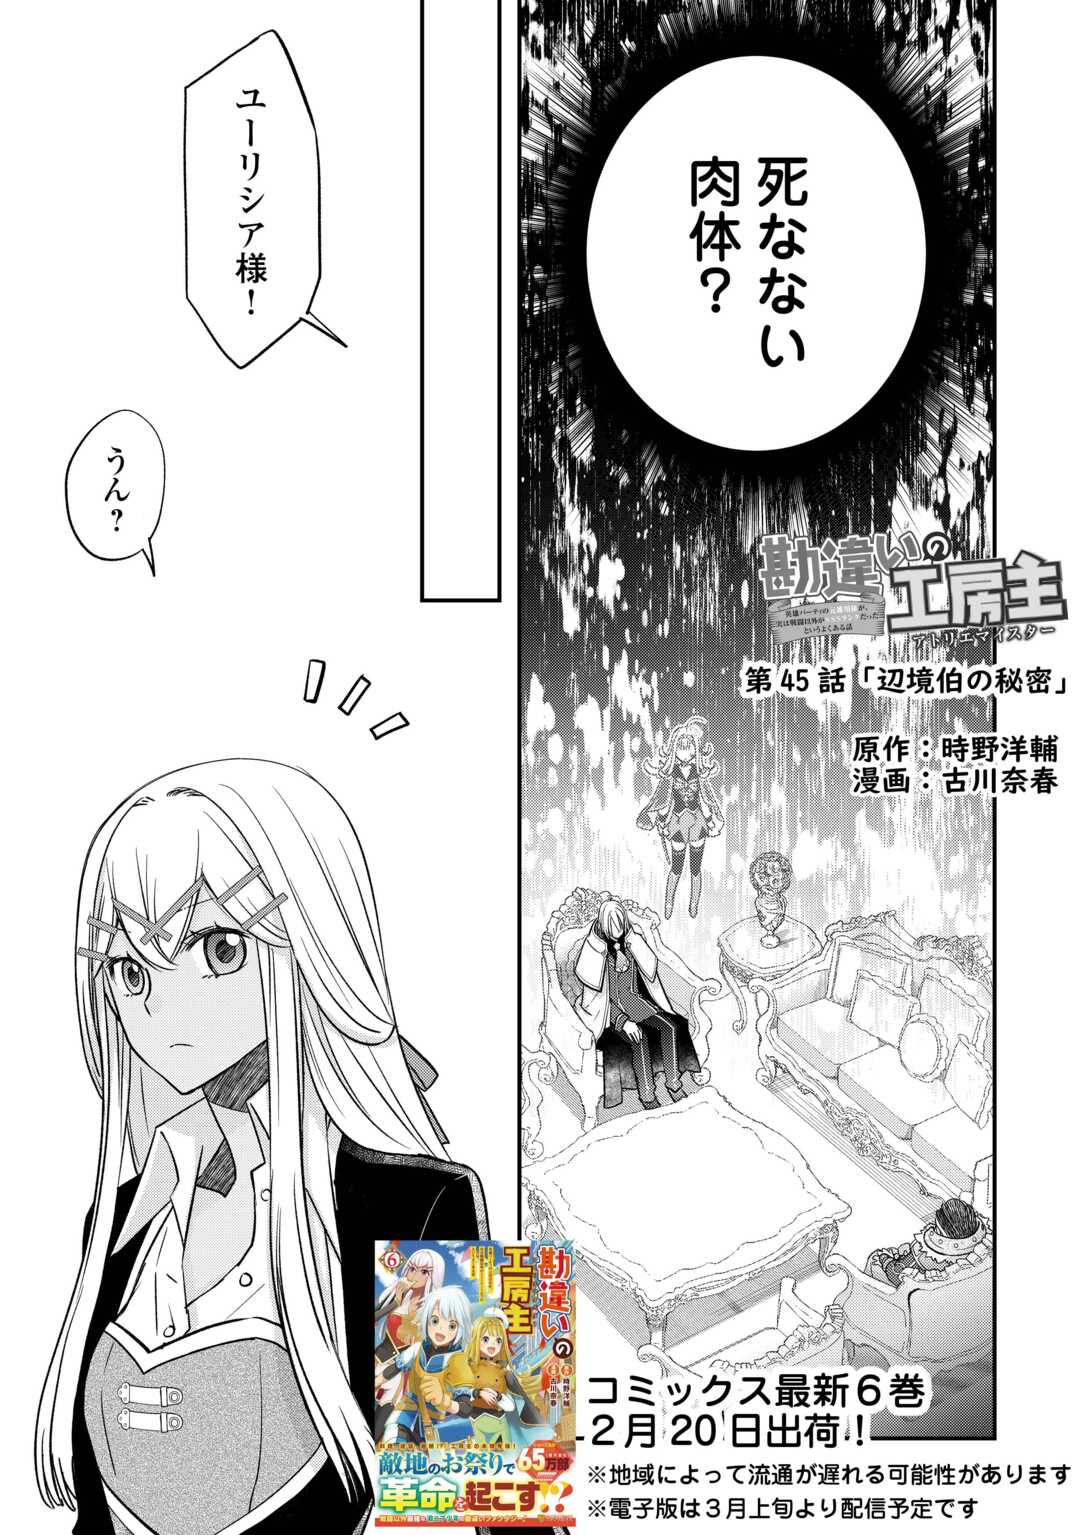 Kanchigai no Atelier Meister - Chapter 45 - Page 1